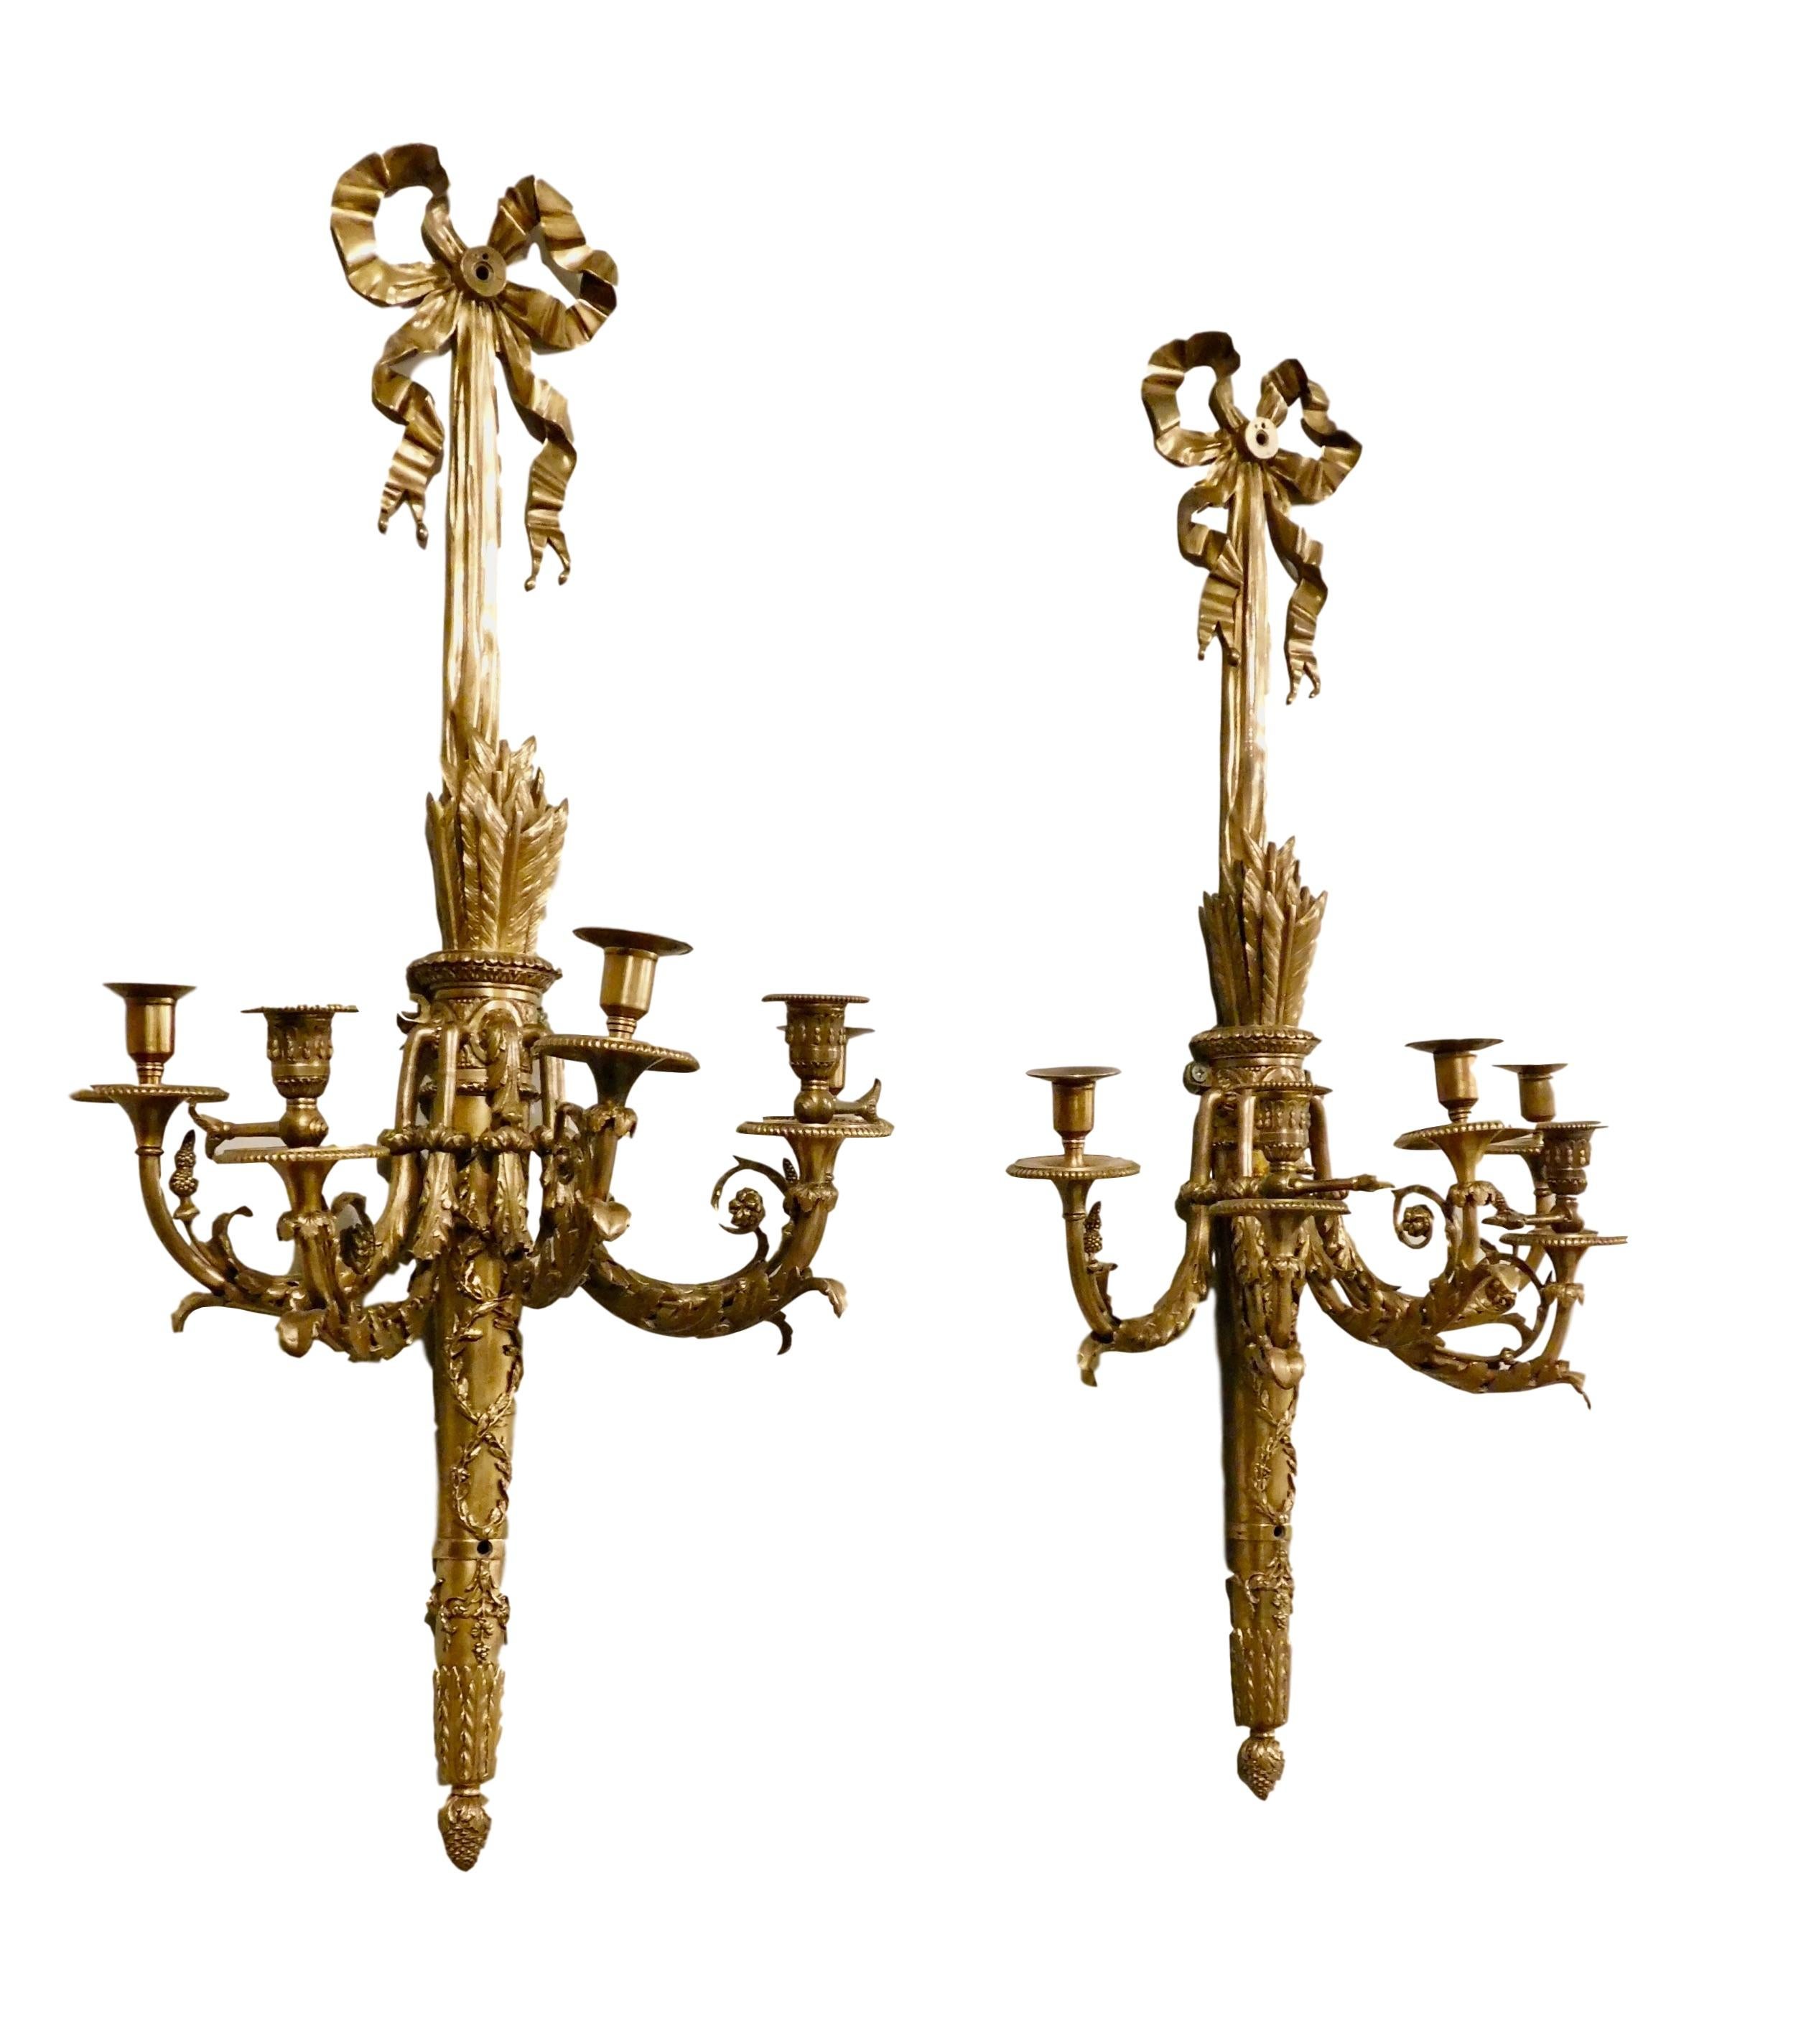 Rare Pair of French Neoclassical style gold bronze and brass quiver of arrows 5-light candelabra sconces. Extra-large one-of-a-kind intricately detailed gold bronze shaft in the shape of quiver of arrows hung by a grand neoclassical ribbon motif;